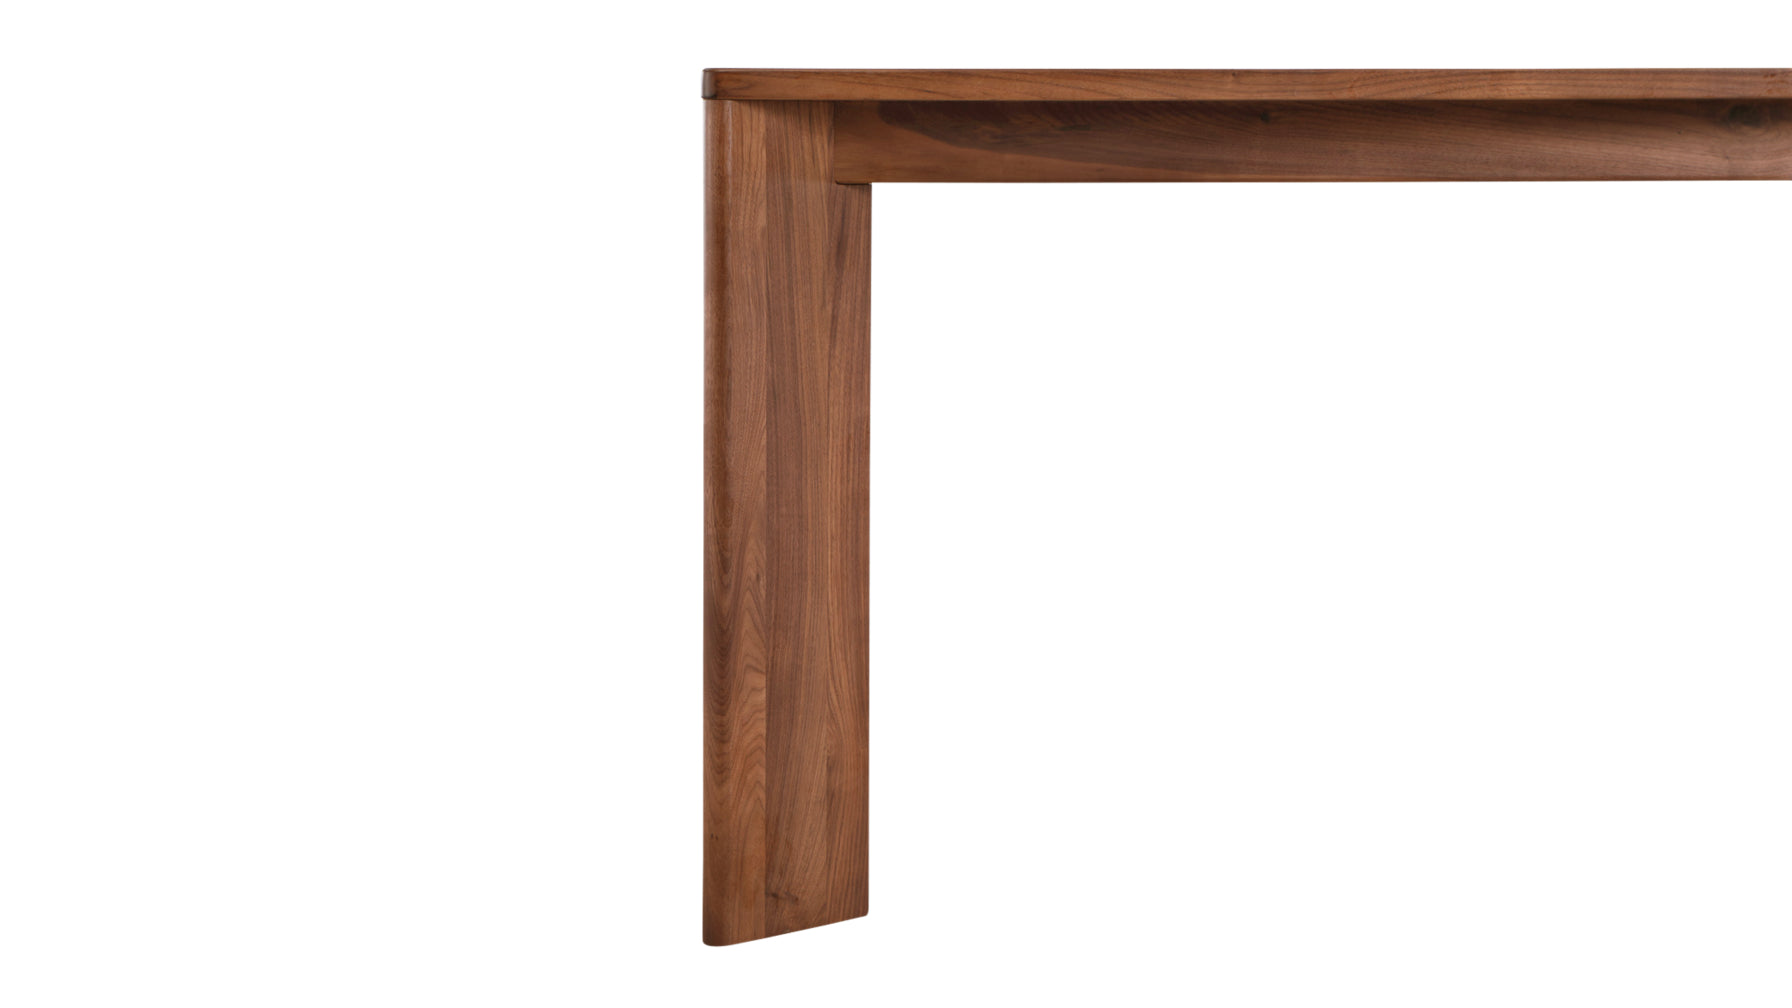 Frame Dining Table, Seats 4-6 People, American Walnut - Image 7